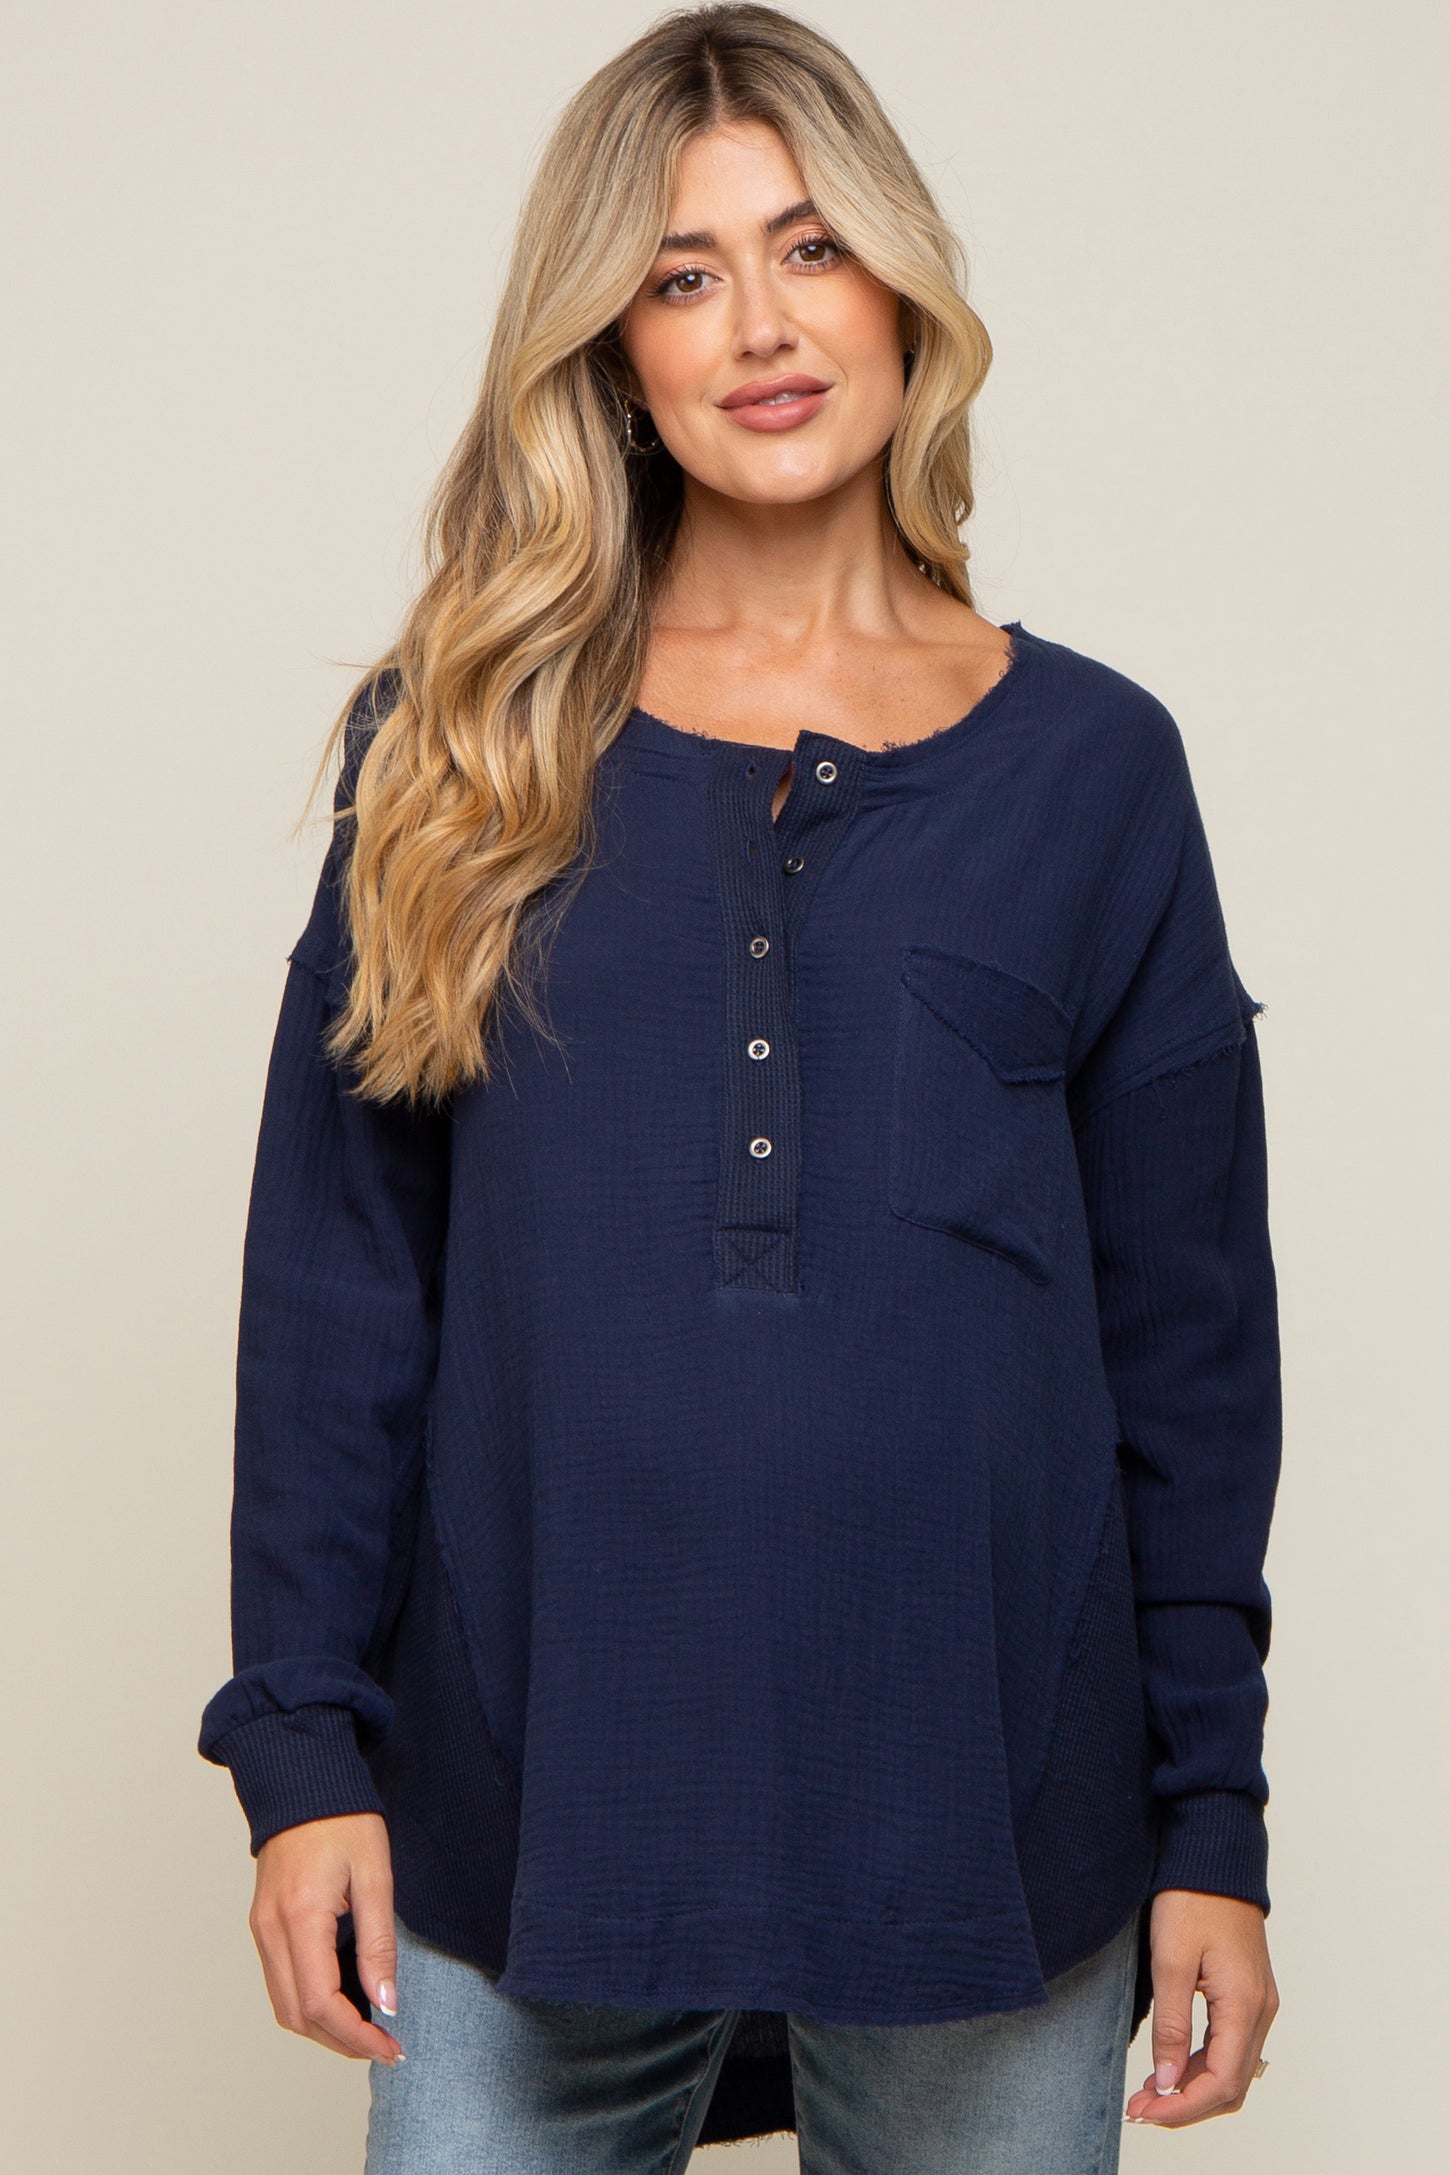 Navy Lightweight Button Front Maternity Tunic